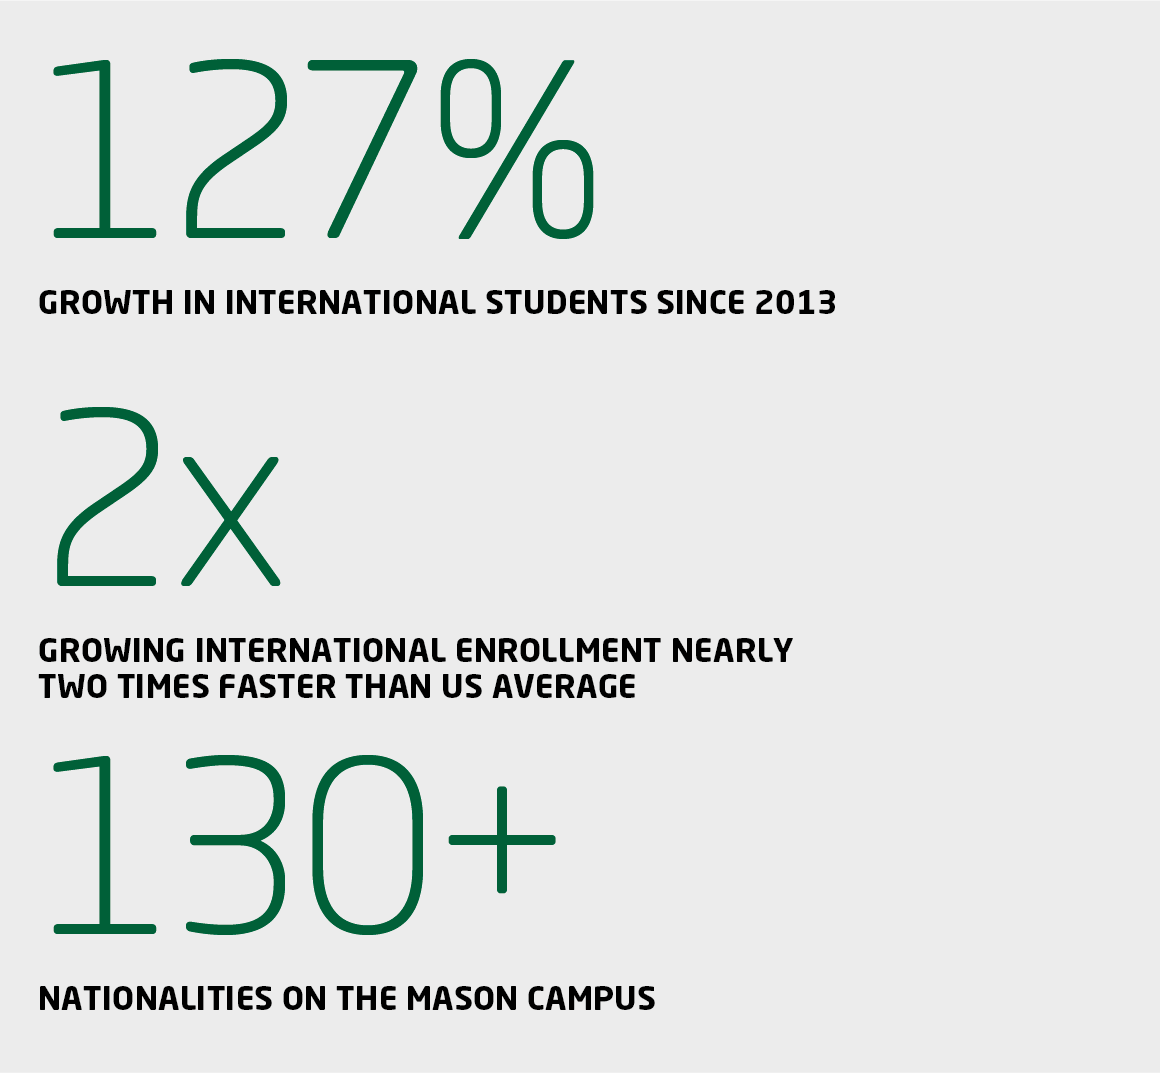 Infographic showing 127% growth in international students at George Mason University since 2013, growing almost two times faster than average US university. 130+ nationalities on Mason campus.